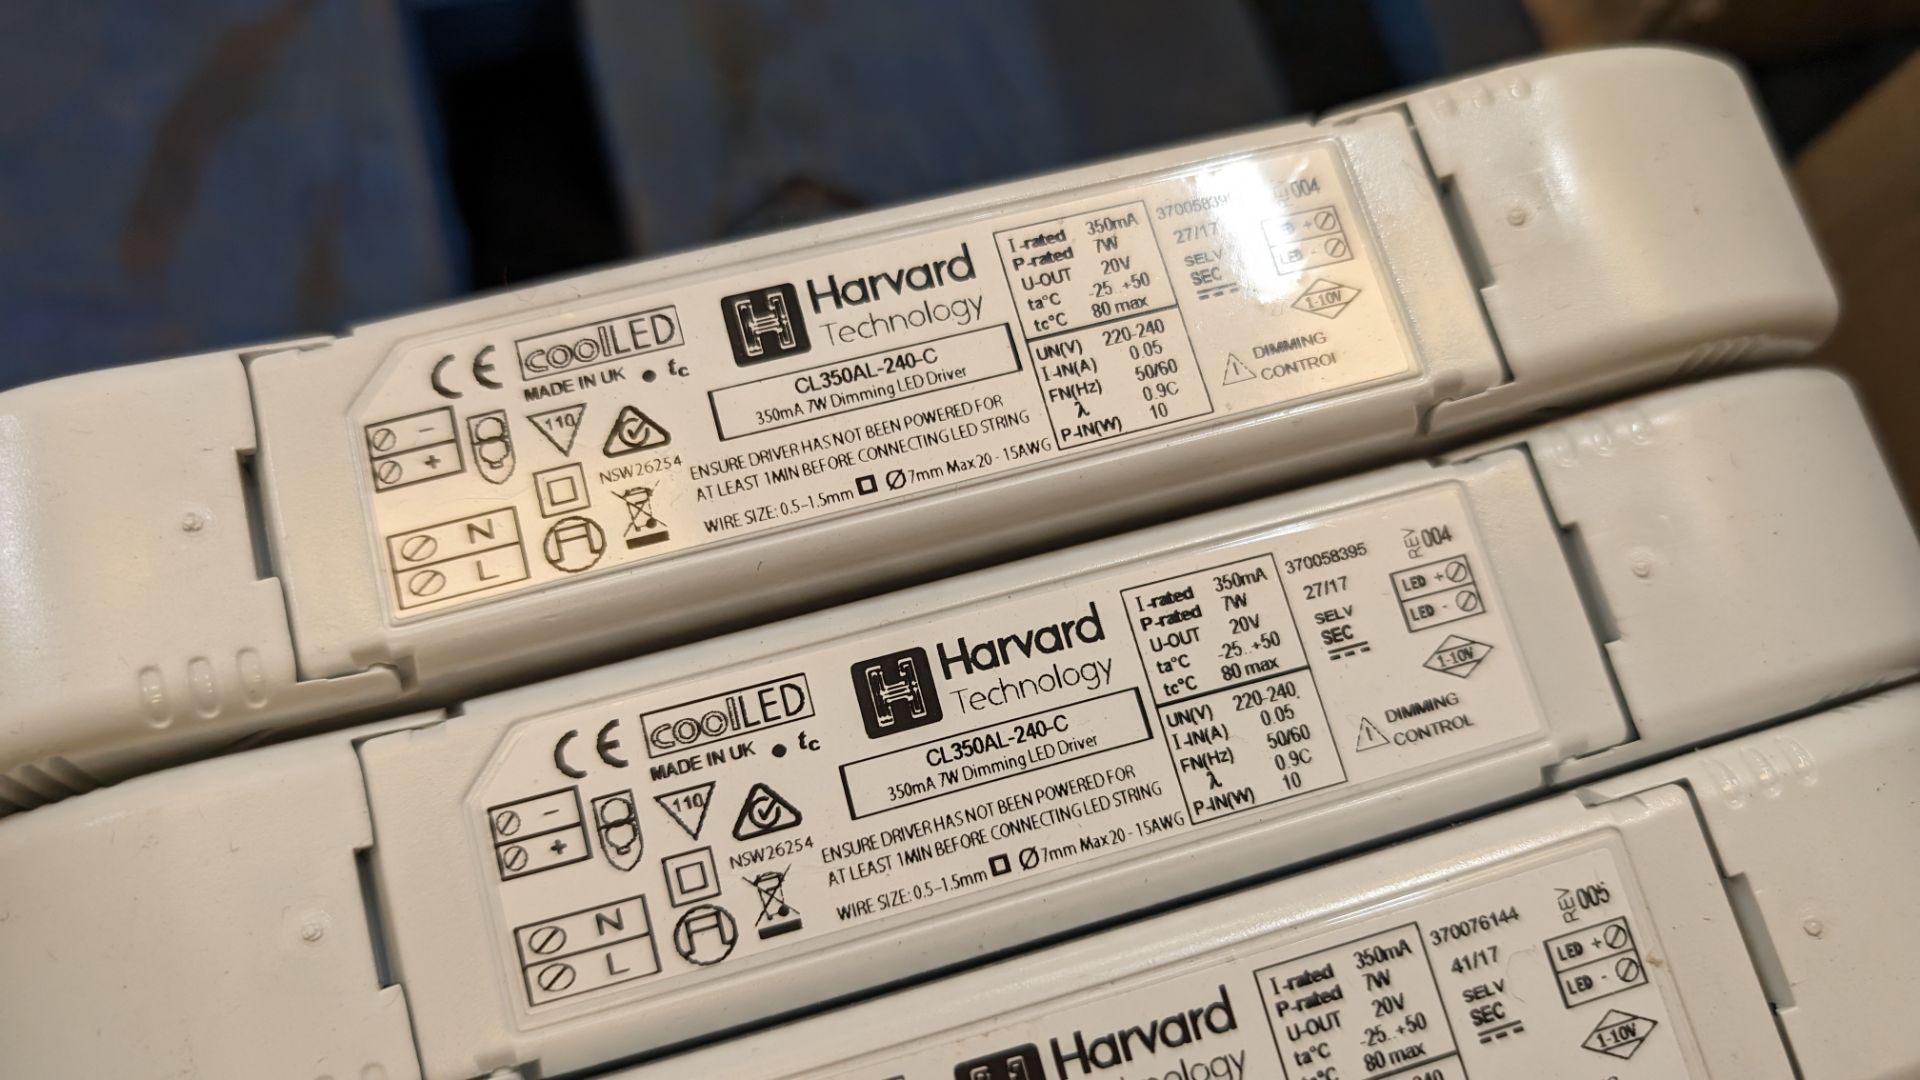 53 off Harvard 7w dimming LED drivers - Image 6 of 6